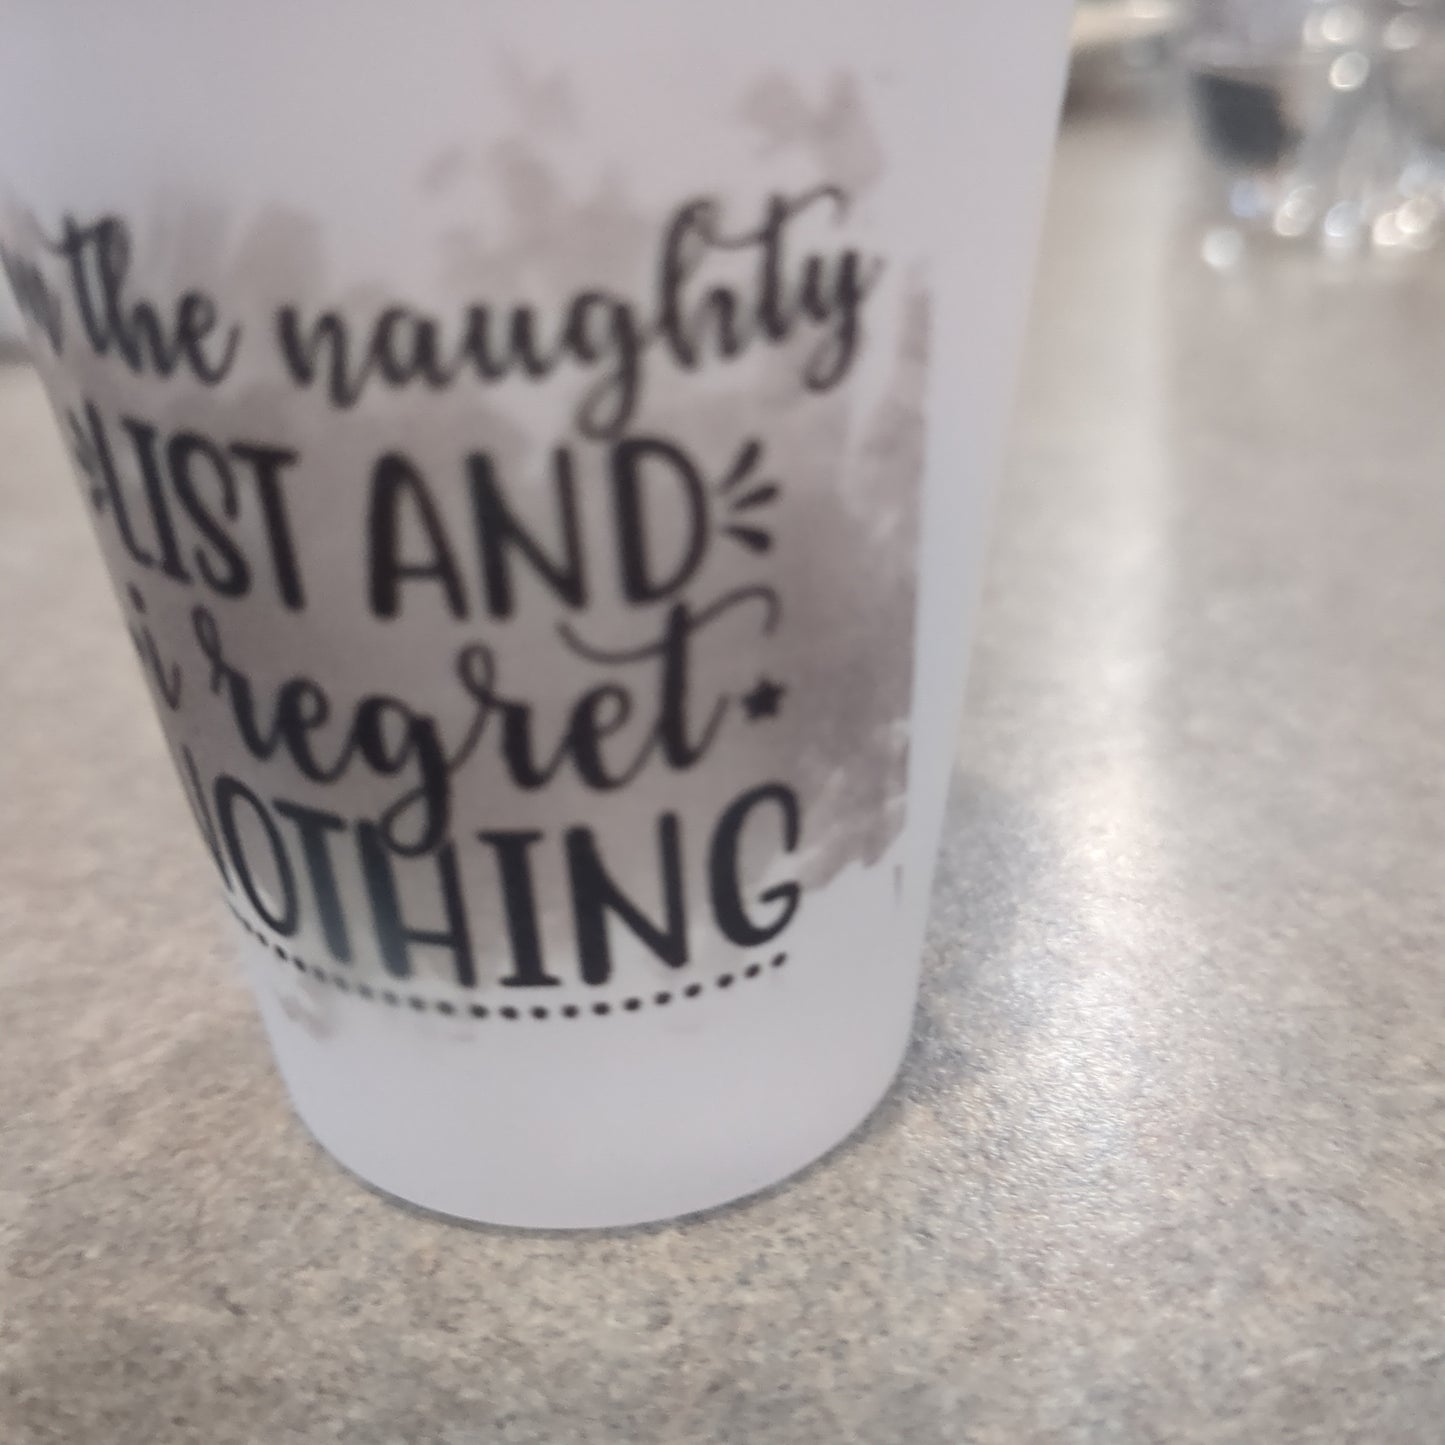 Imperfect Frosted glass shot glass. On the naughty list and regret nothing